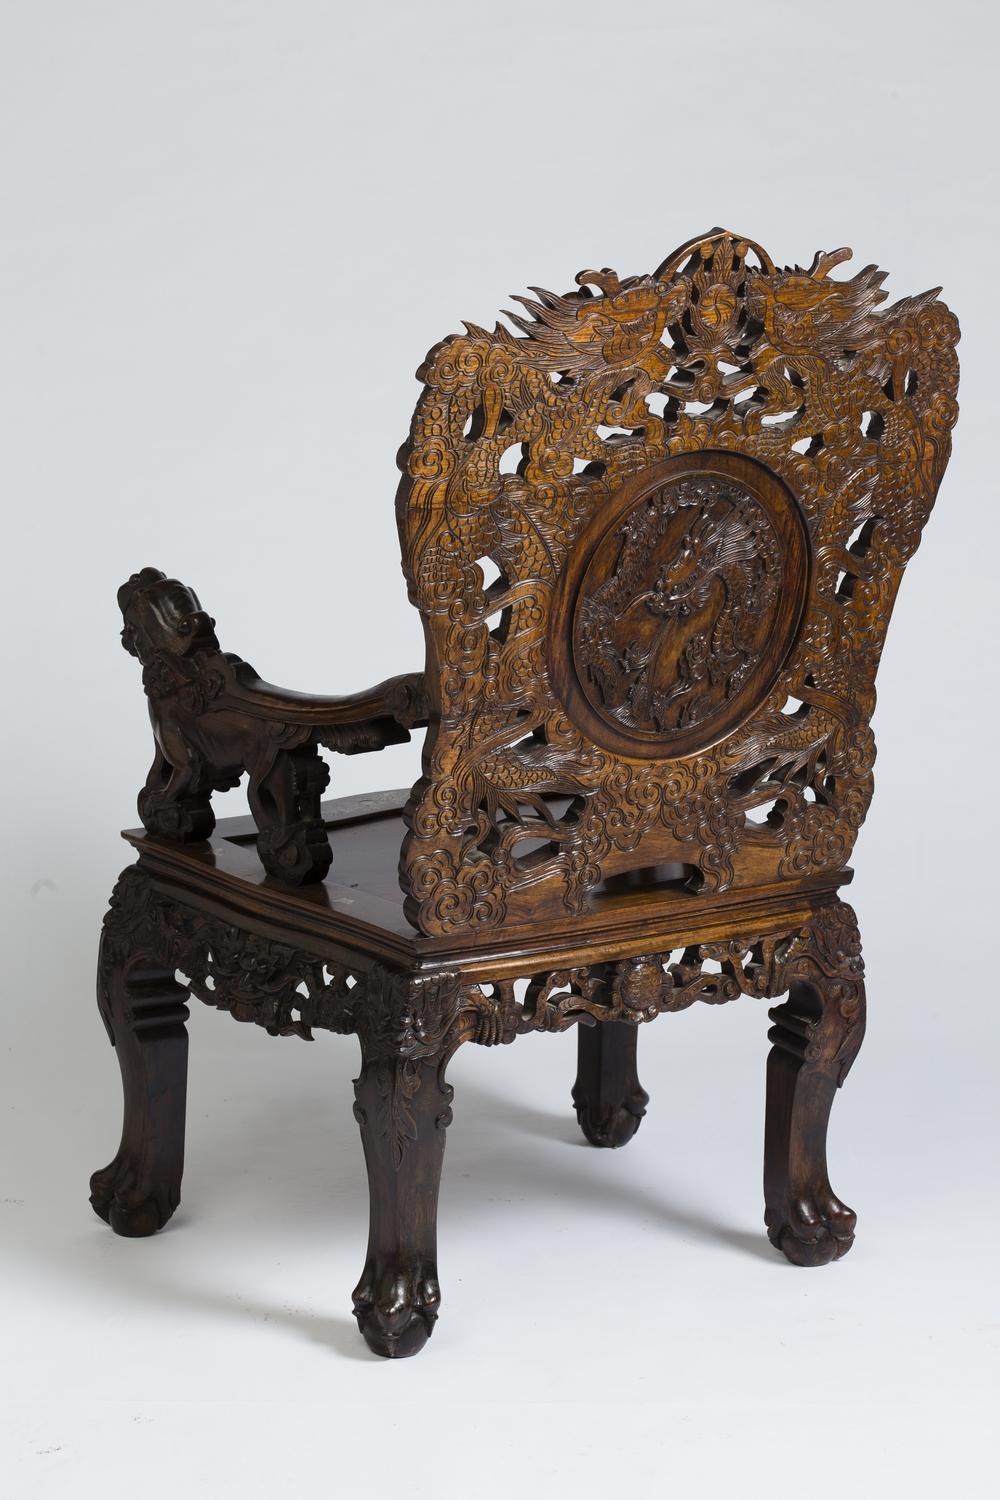 Pair of Indochinese armchairs, circa 1880-1900, in finely carved and openwork ironwood, inlaid with a rich decoration of mother-of-pearl marquetry.
The two armchairs are identical but each mother of pearl medallion has a different decor.